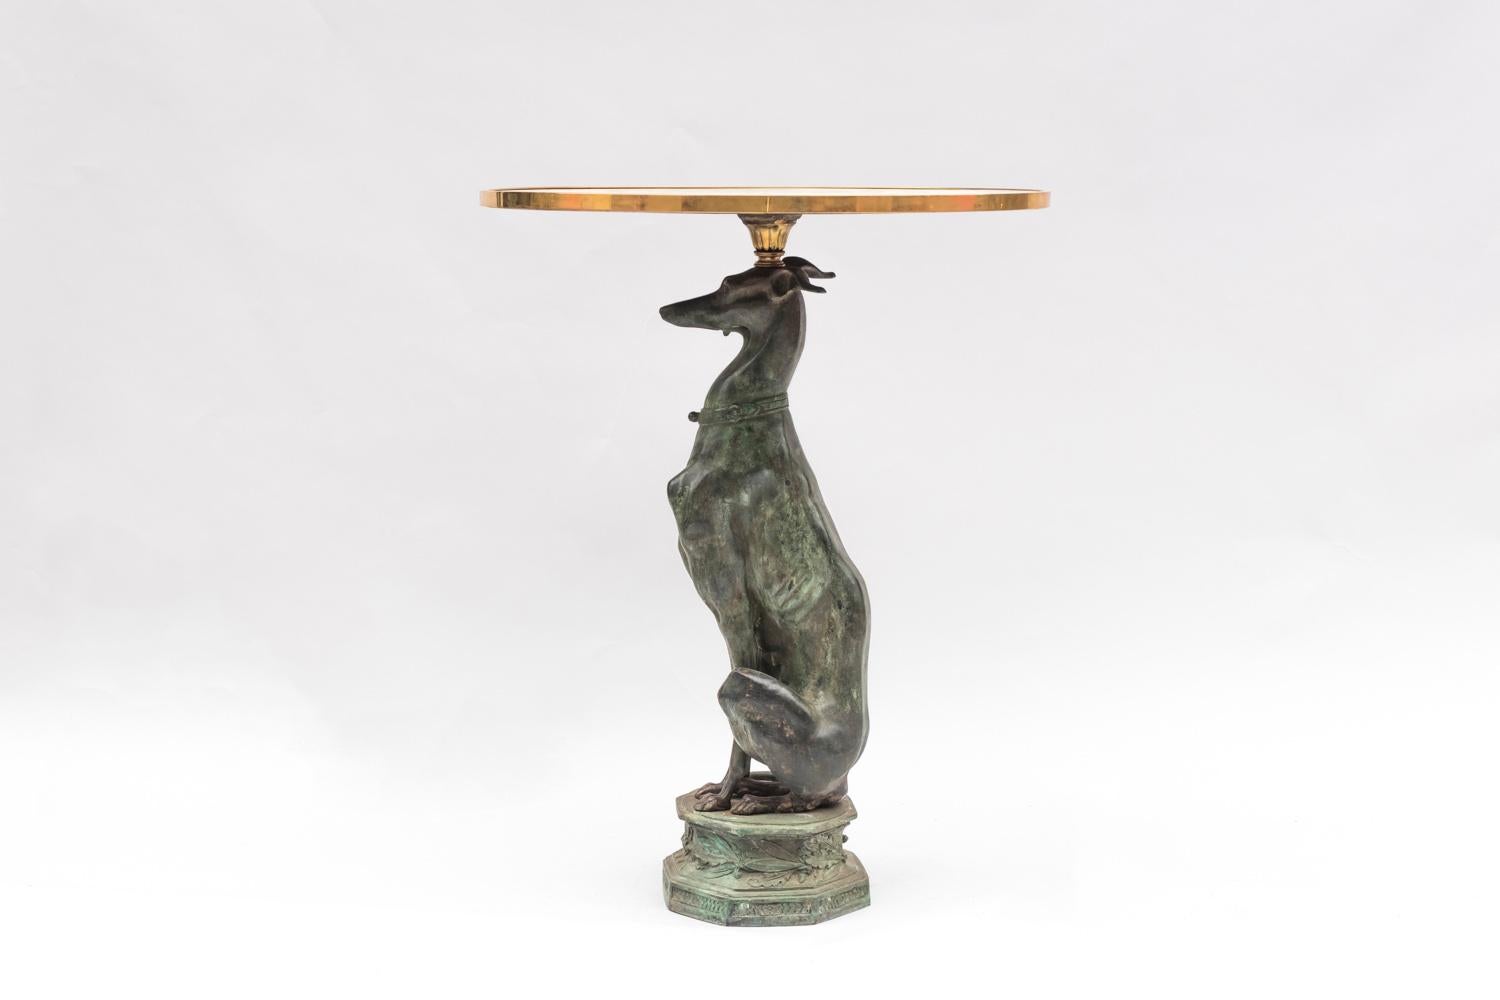 Greyhound stand in bronze and marble standing on a leg in patinated bronze statue shape figuring a sat greyhound on a octogonal base also in patinated bronze adorned with laurel and oak leaves, corns, knots and small flowers friezes in rectangular